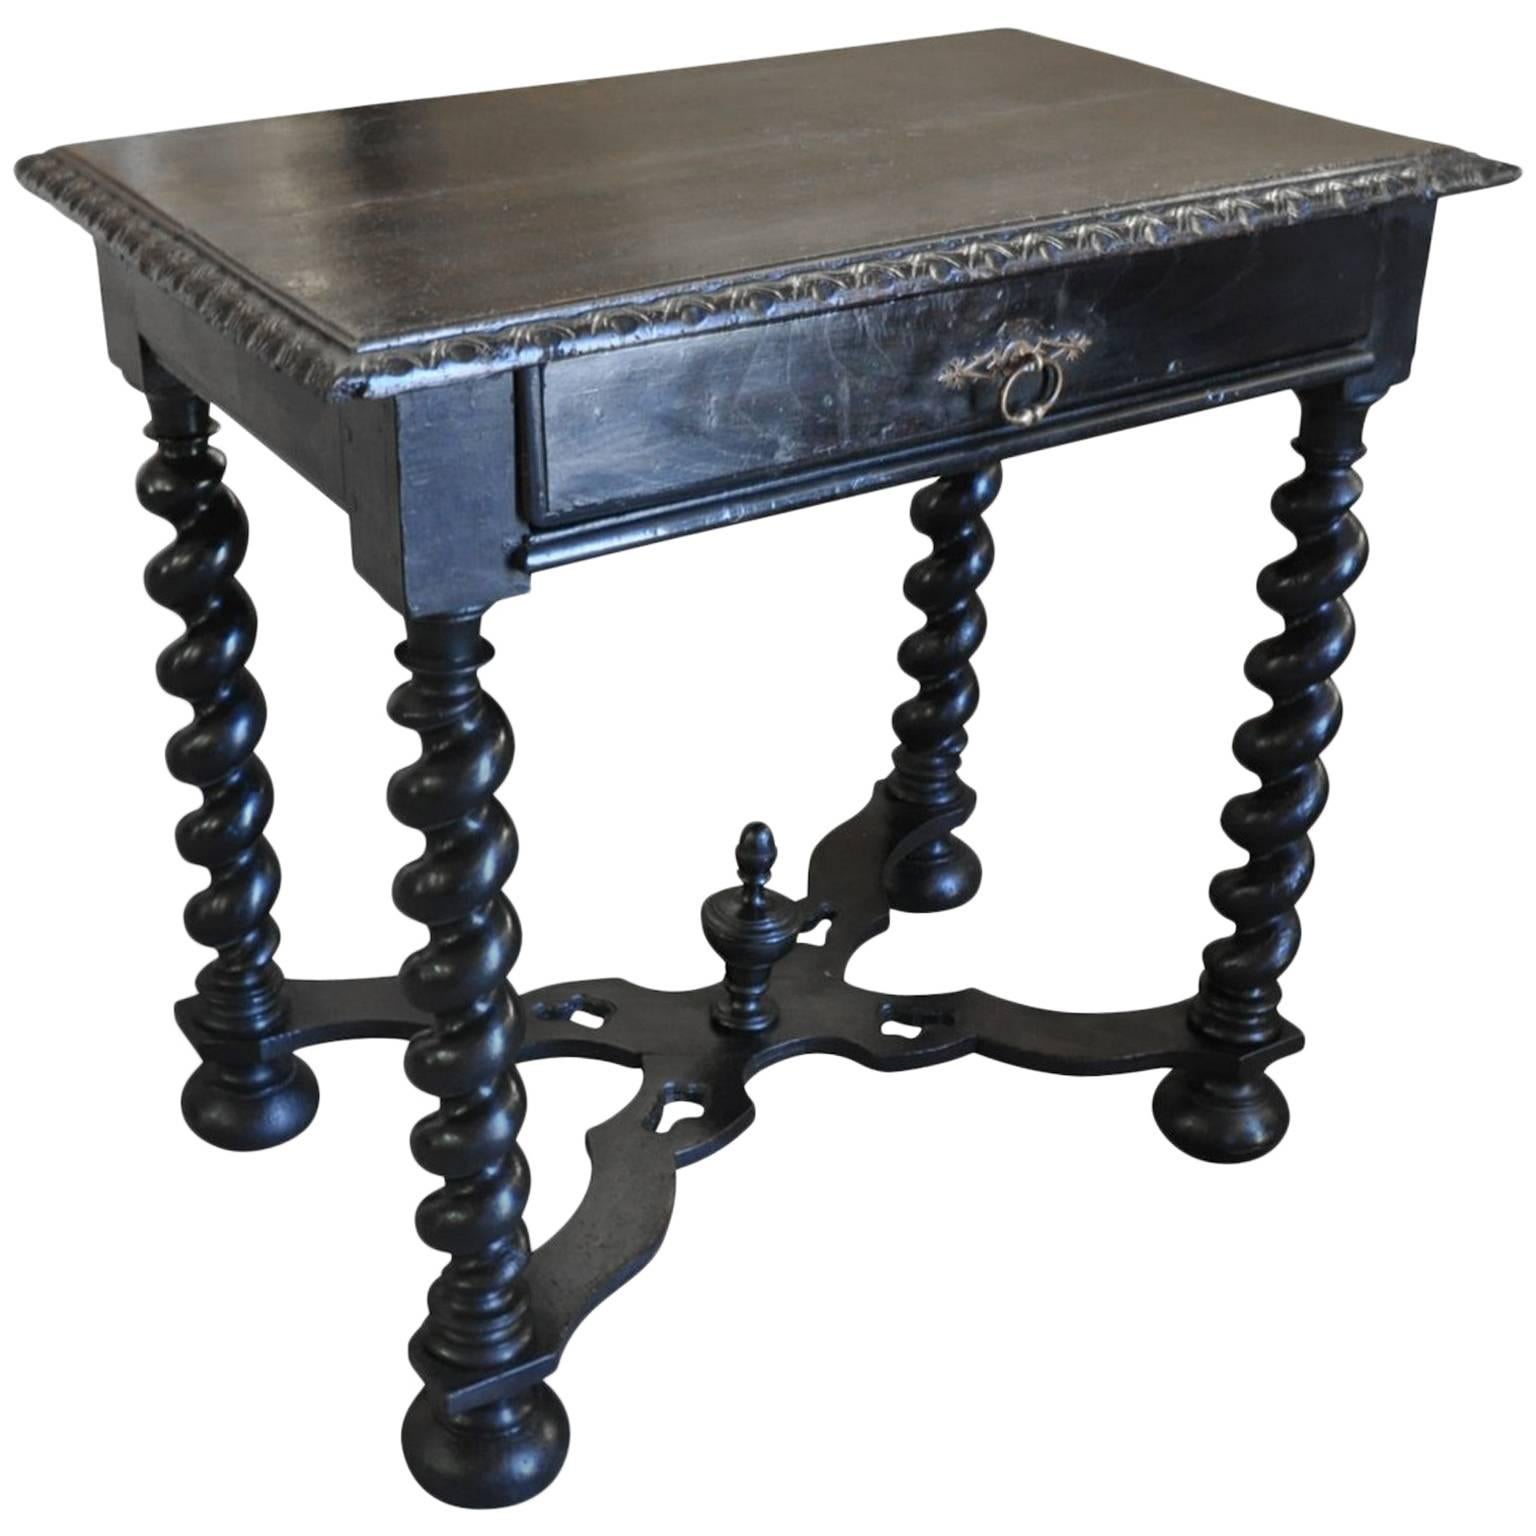 19th Century French Louis XIII Style Writing Table